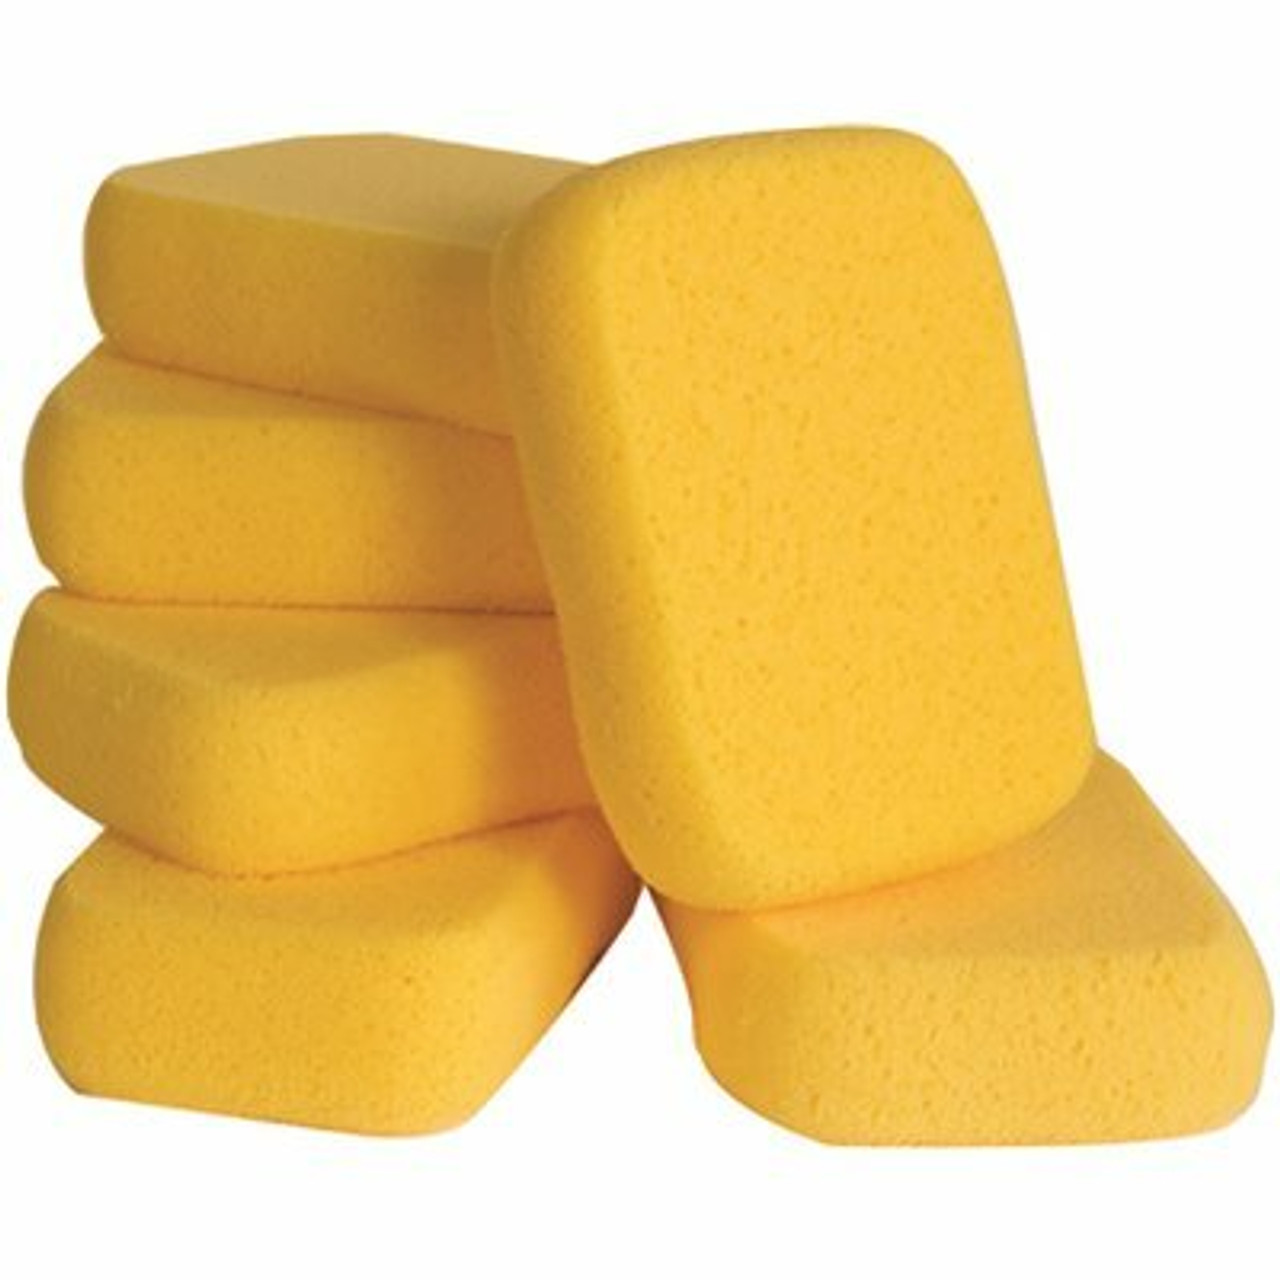 Qep 7-1/2 In. X 5-1/2 In. Extra Large Grouting, Cleaning And Washing Sponge